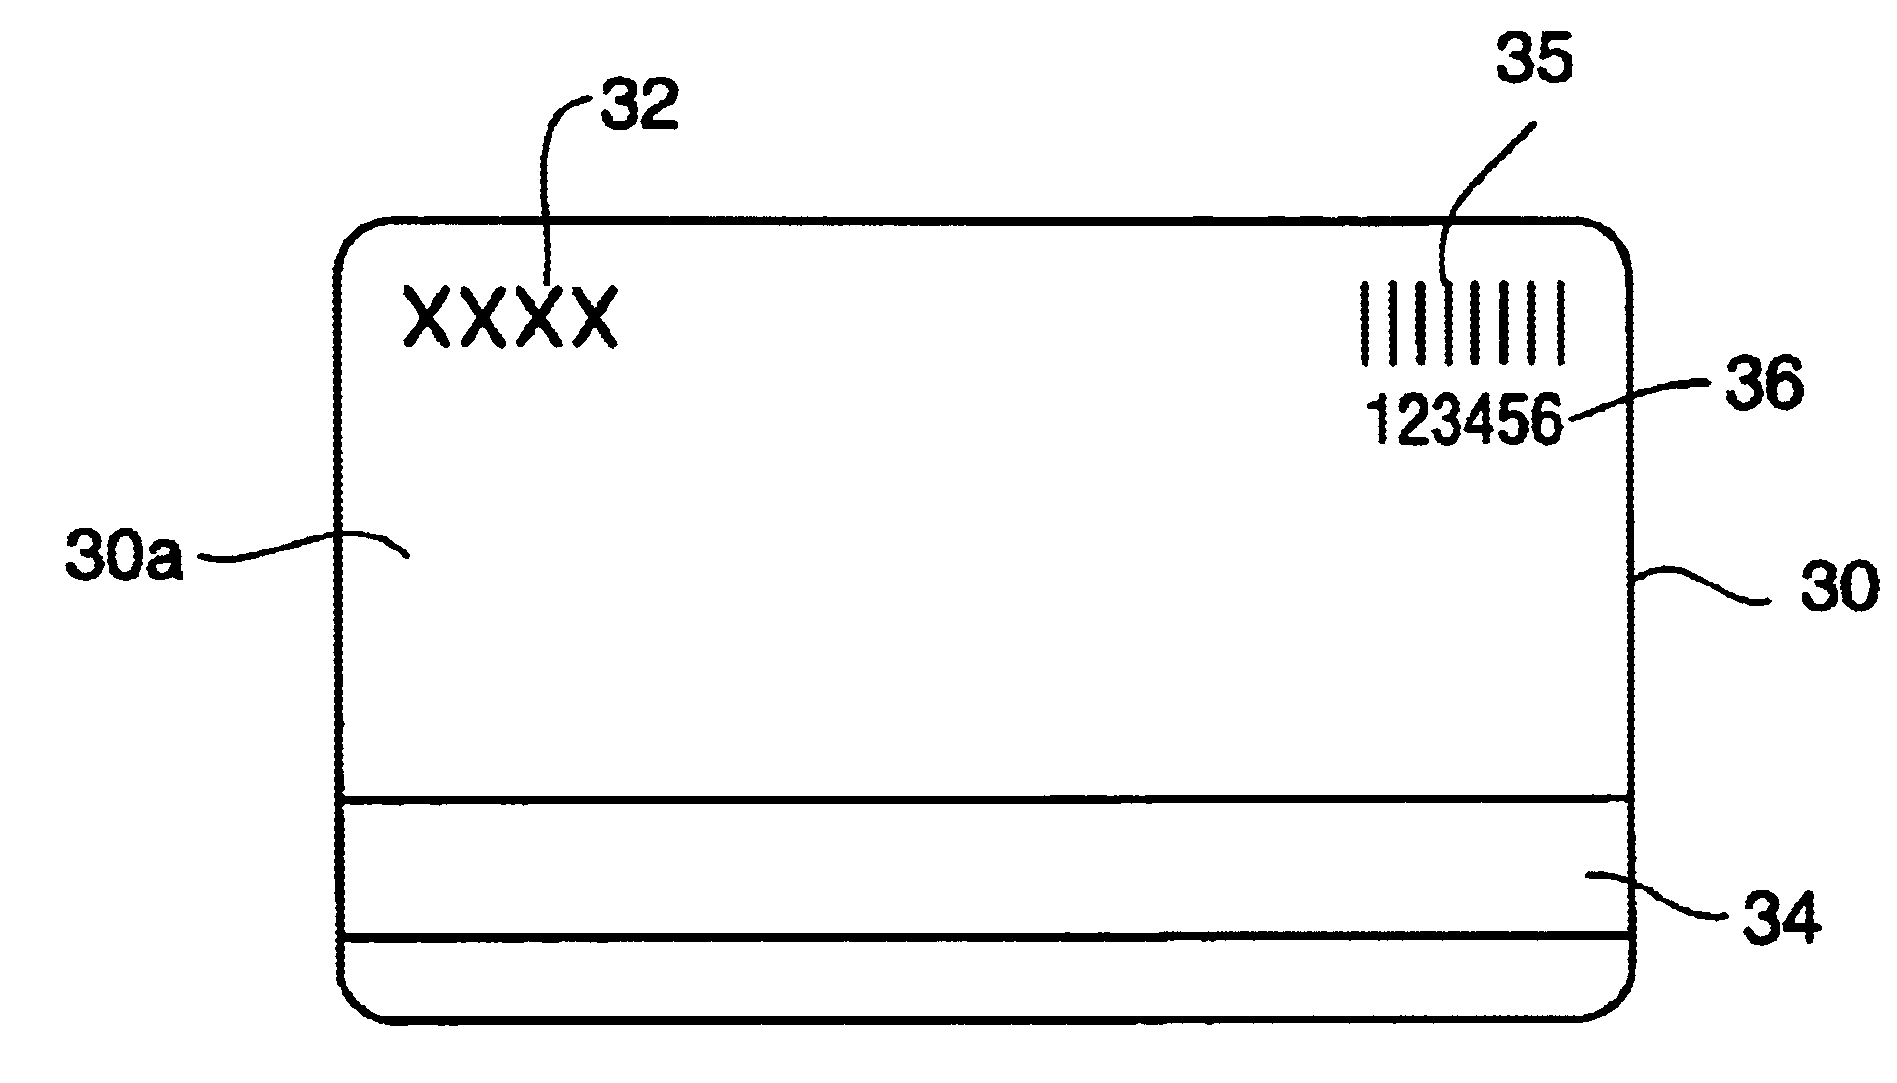 Printed item having an image with a high durability and/or resolution